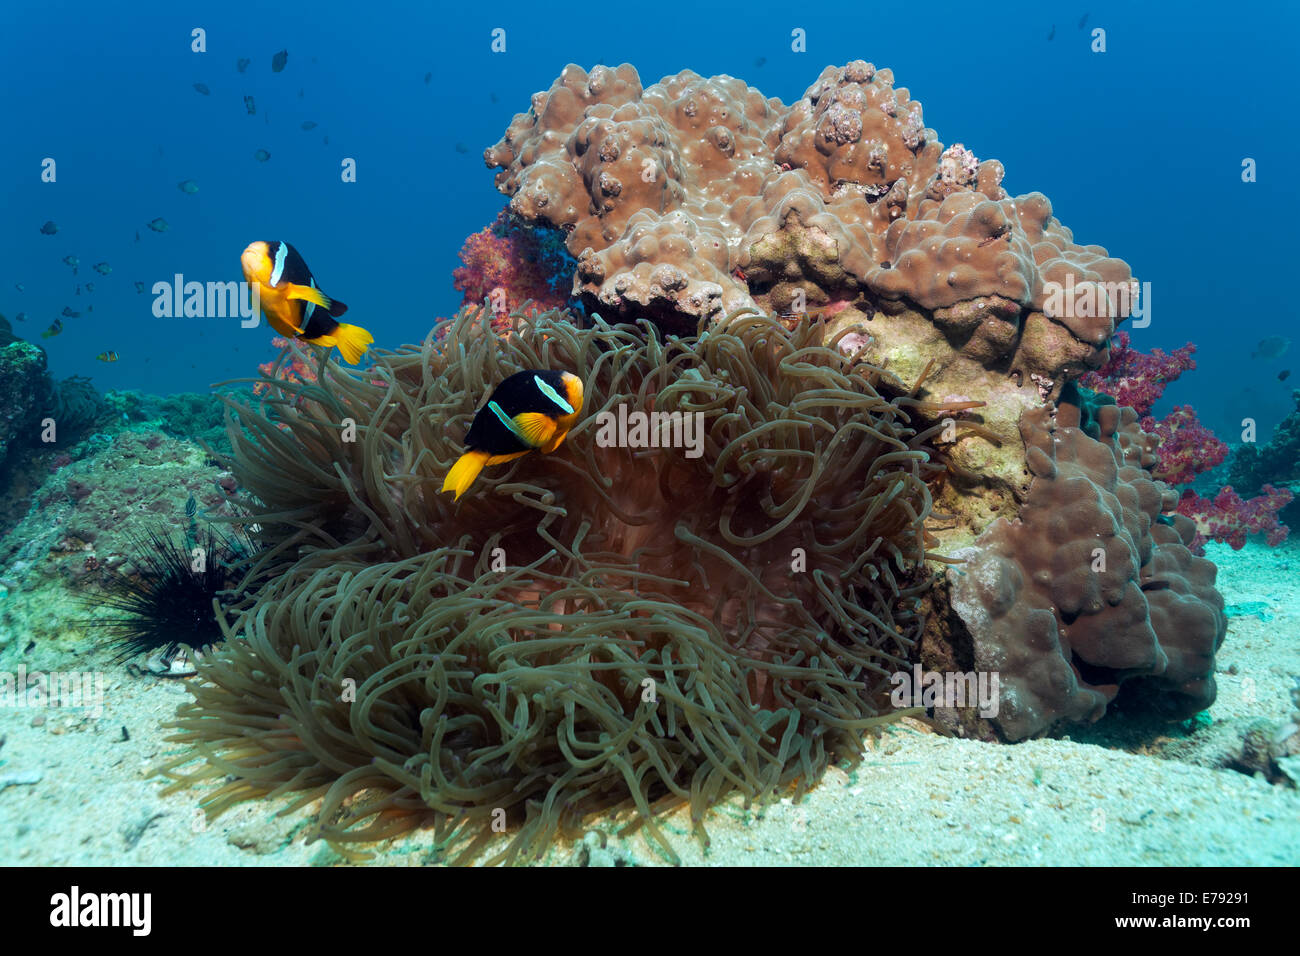 Clark's Anemonefish (Amphiprion clarkii) at a coral reef with a Sebae Anemone (Heteractis crispa) Stock Photo